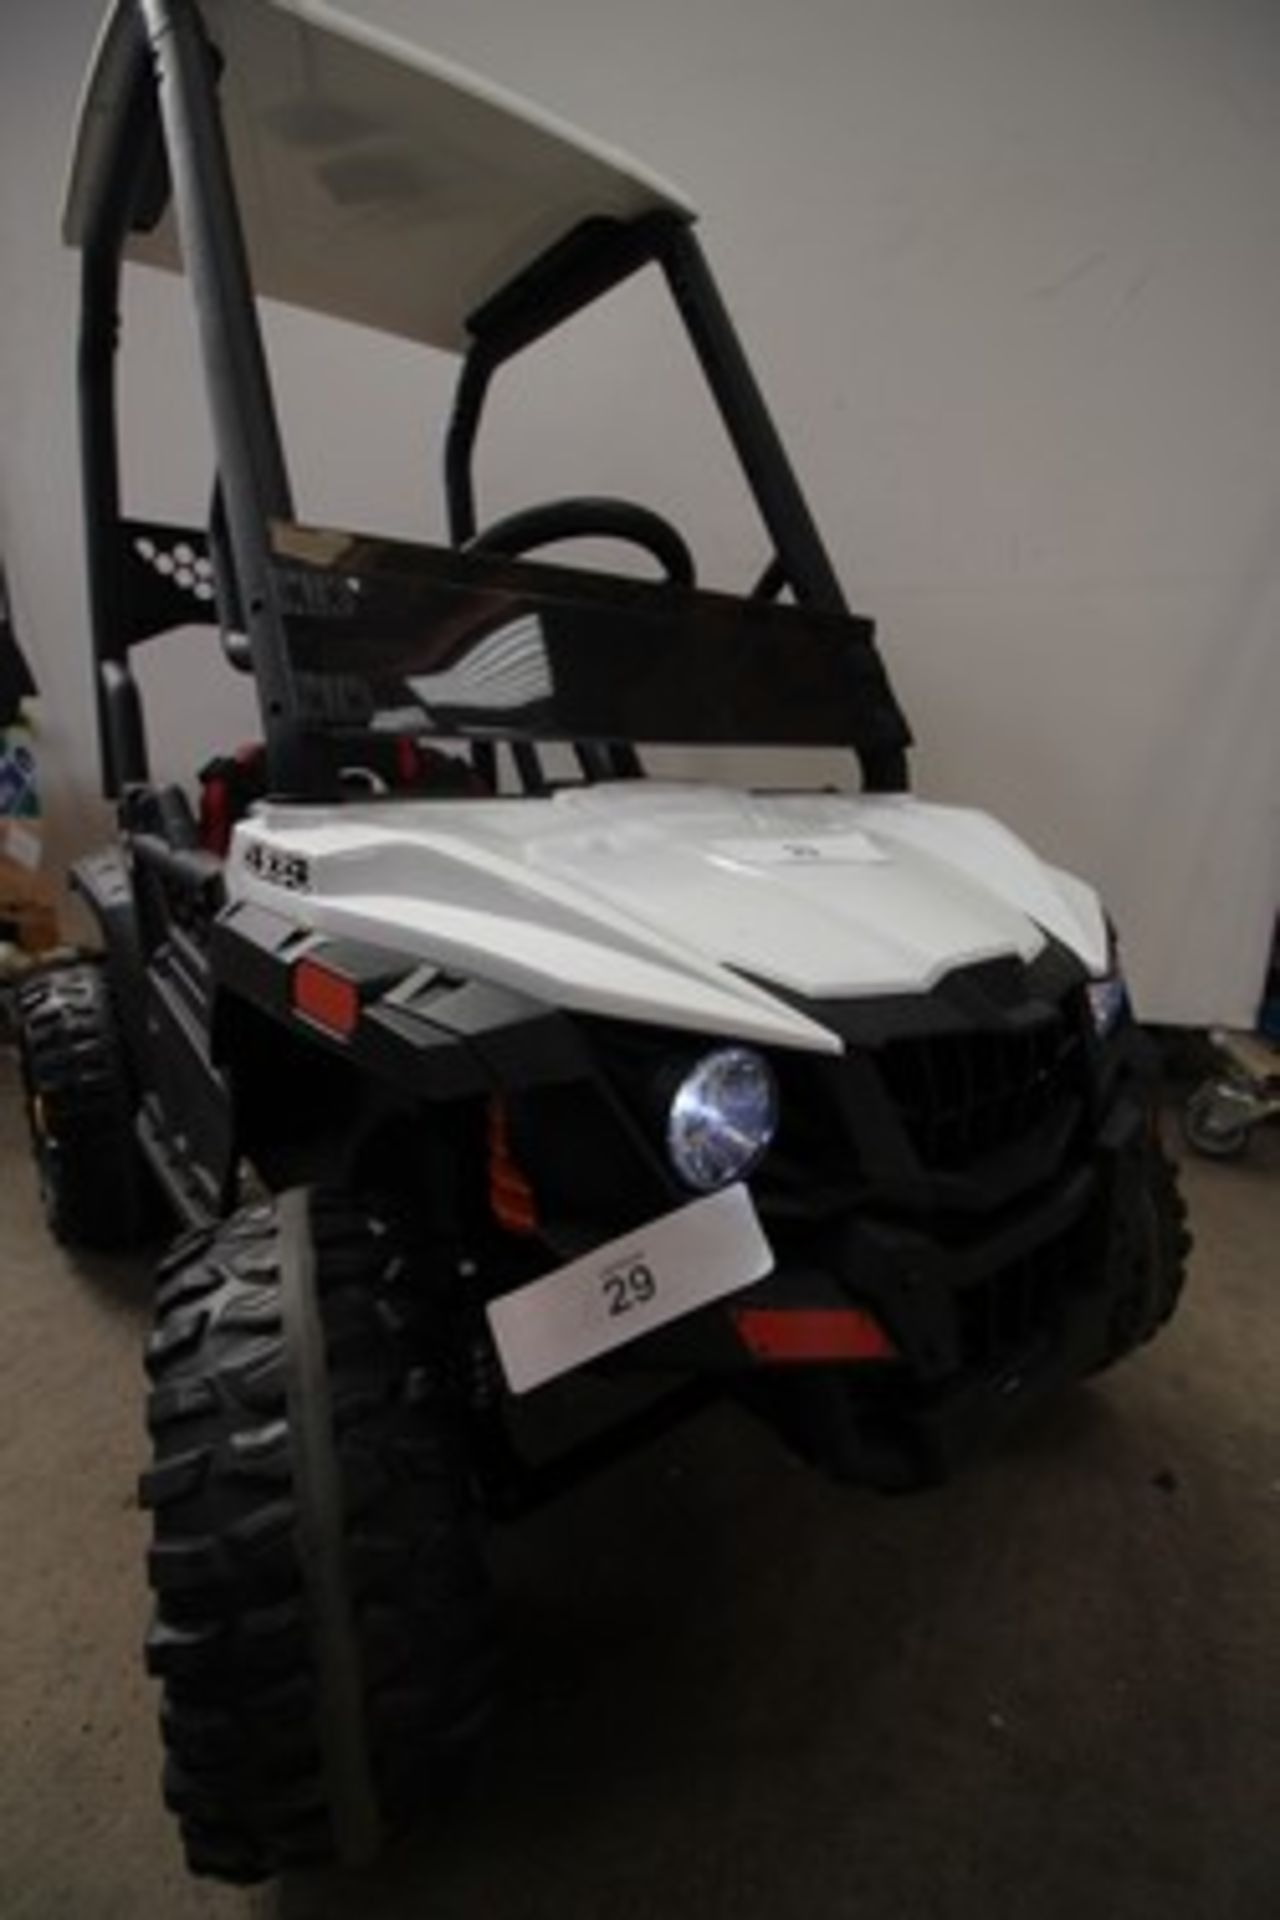 1 x 12v child's off road Buggy, fully assembled, checked and complete with charger and remote - Image 3 of 3